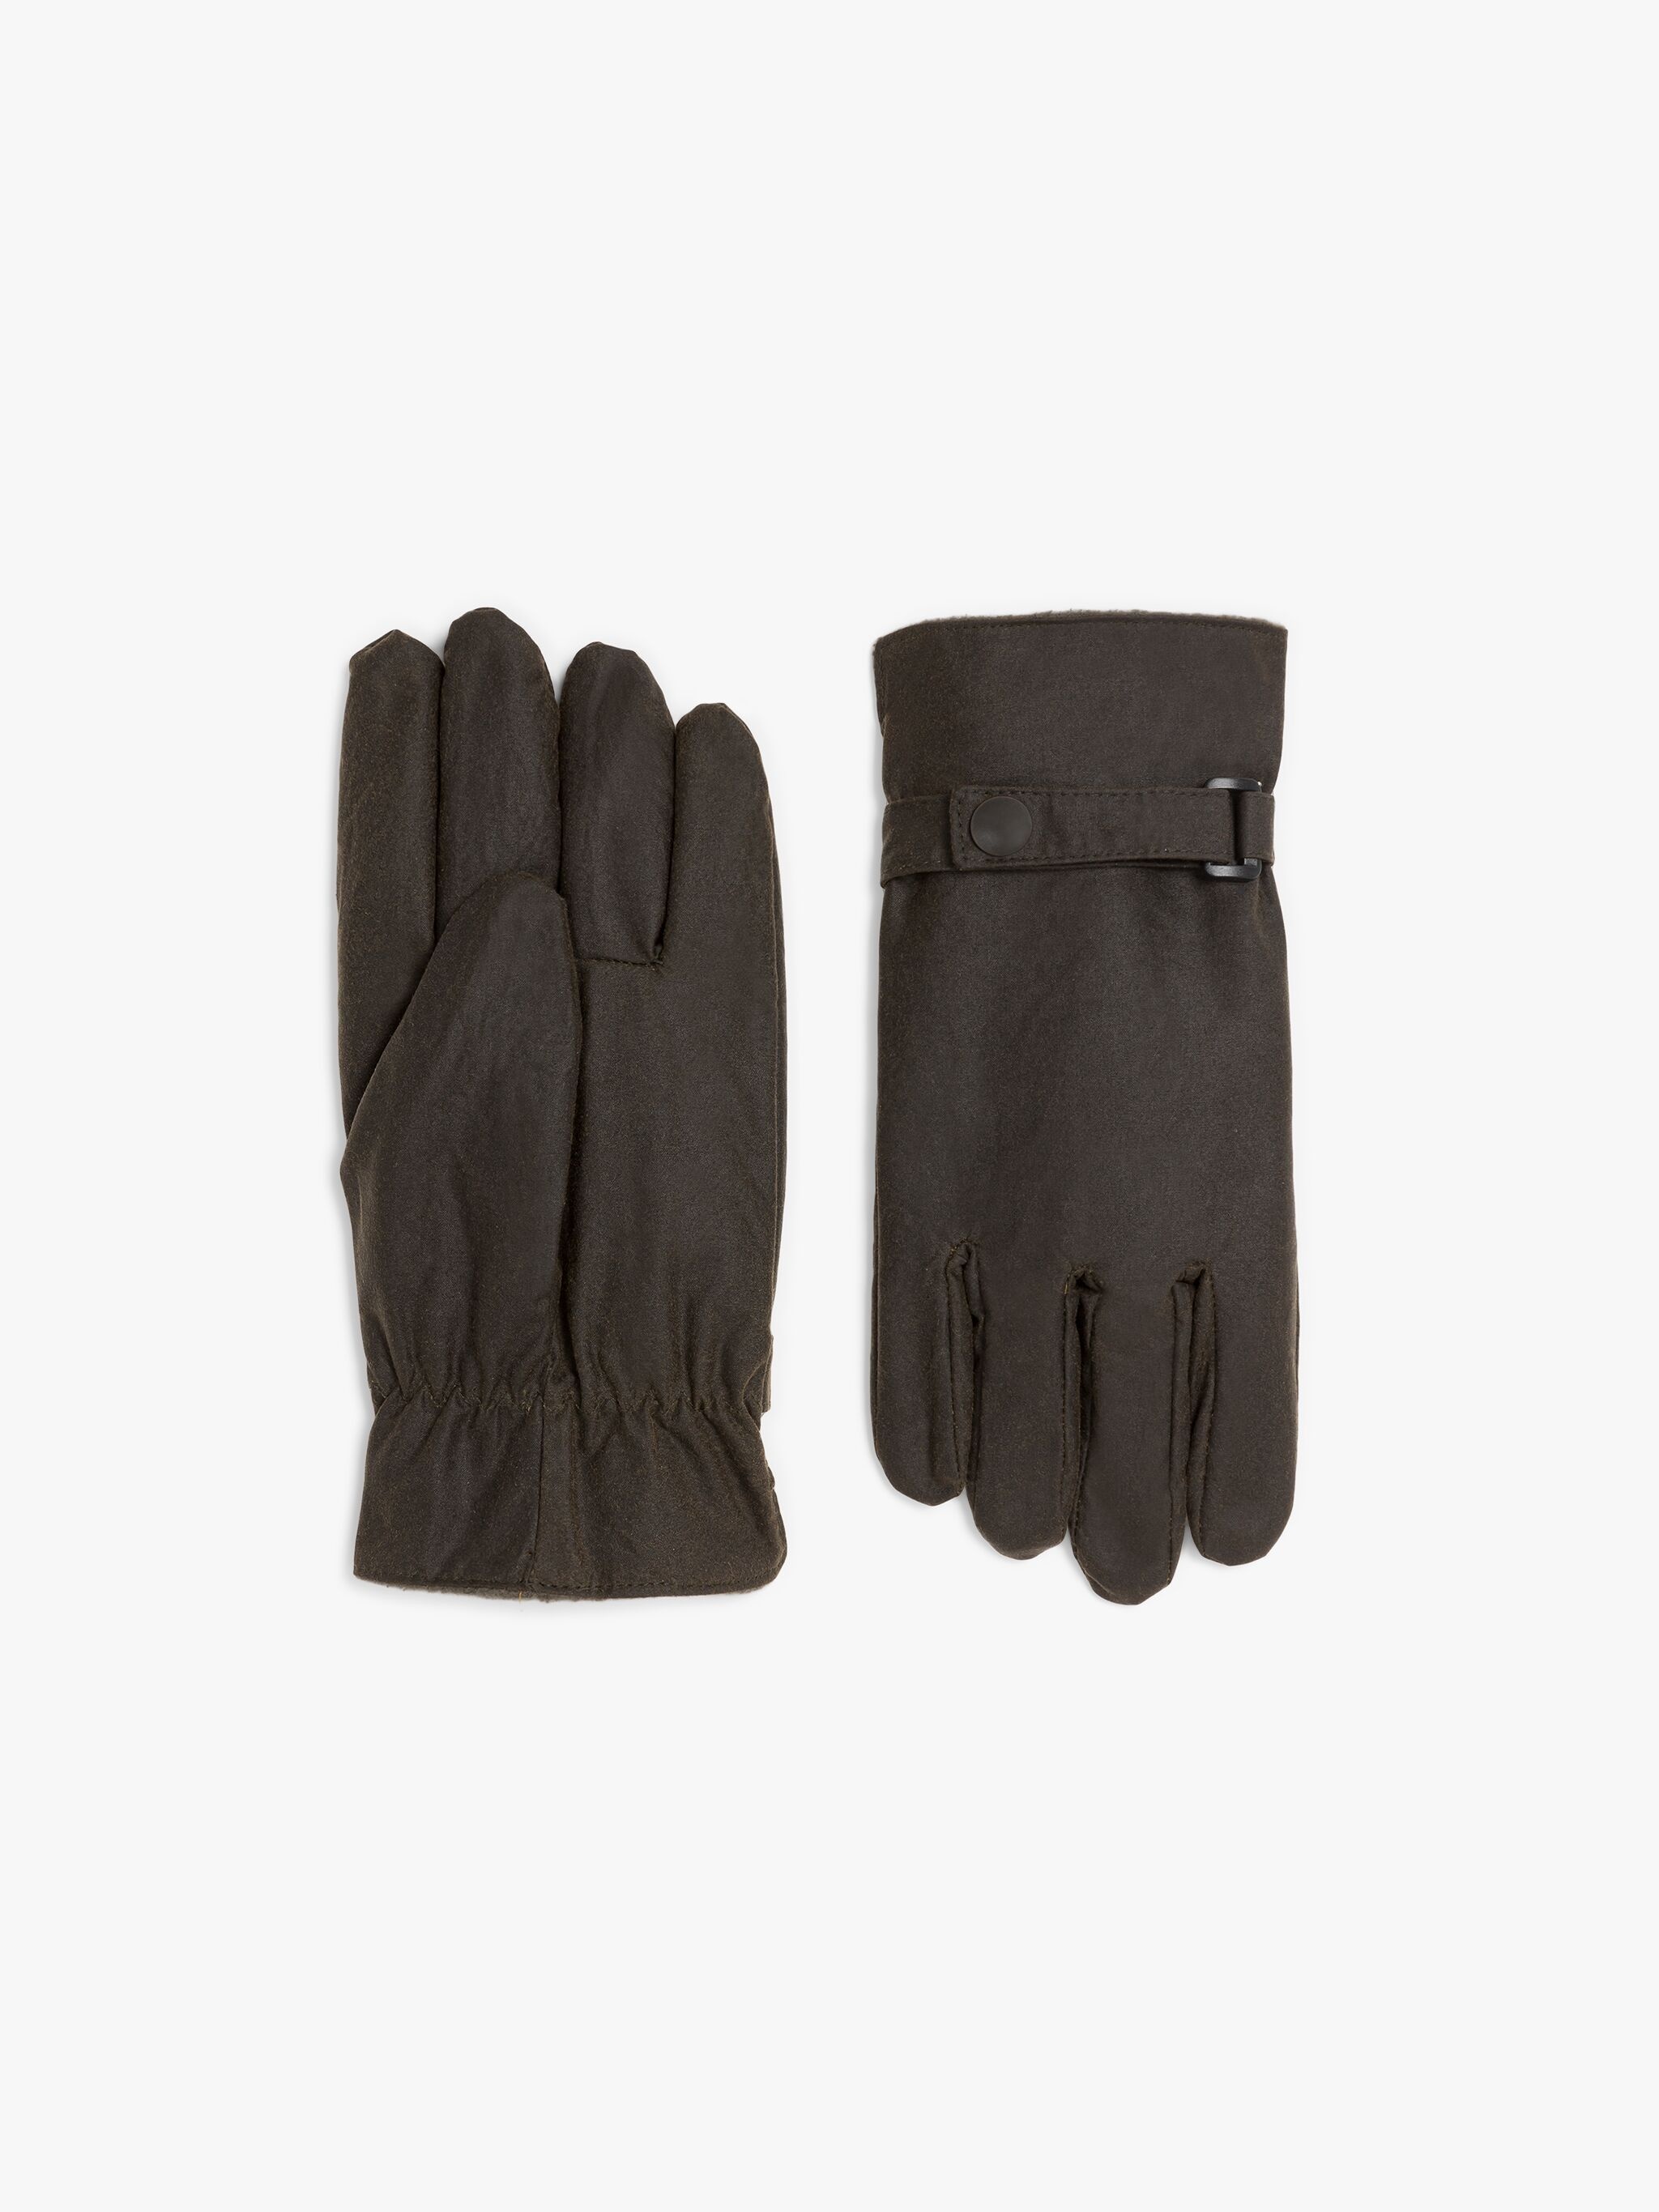 OLIVE WAXED COTTON GLOVES - 1